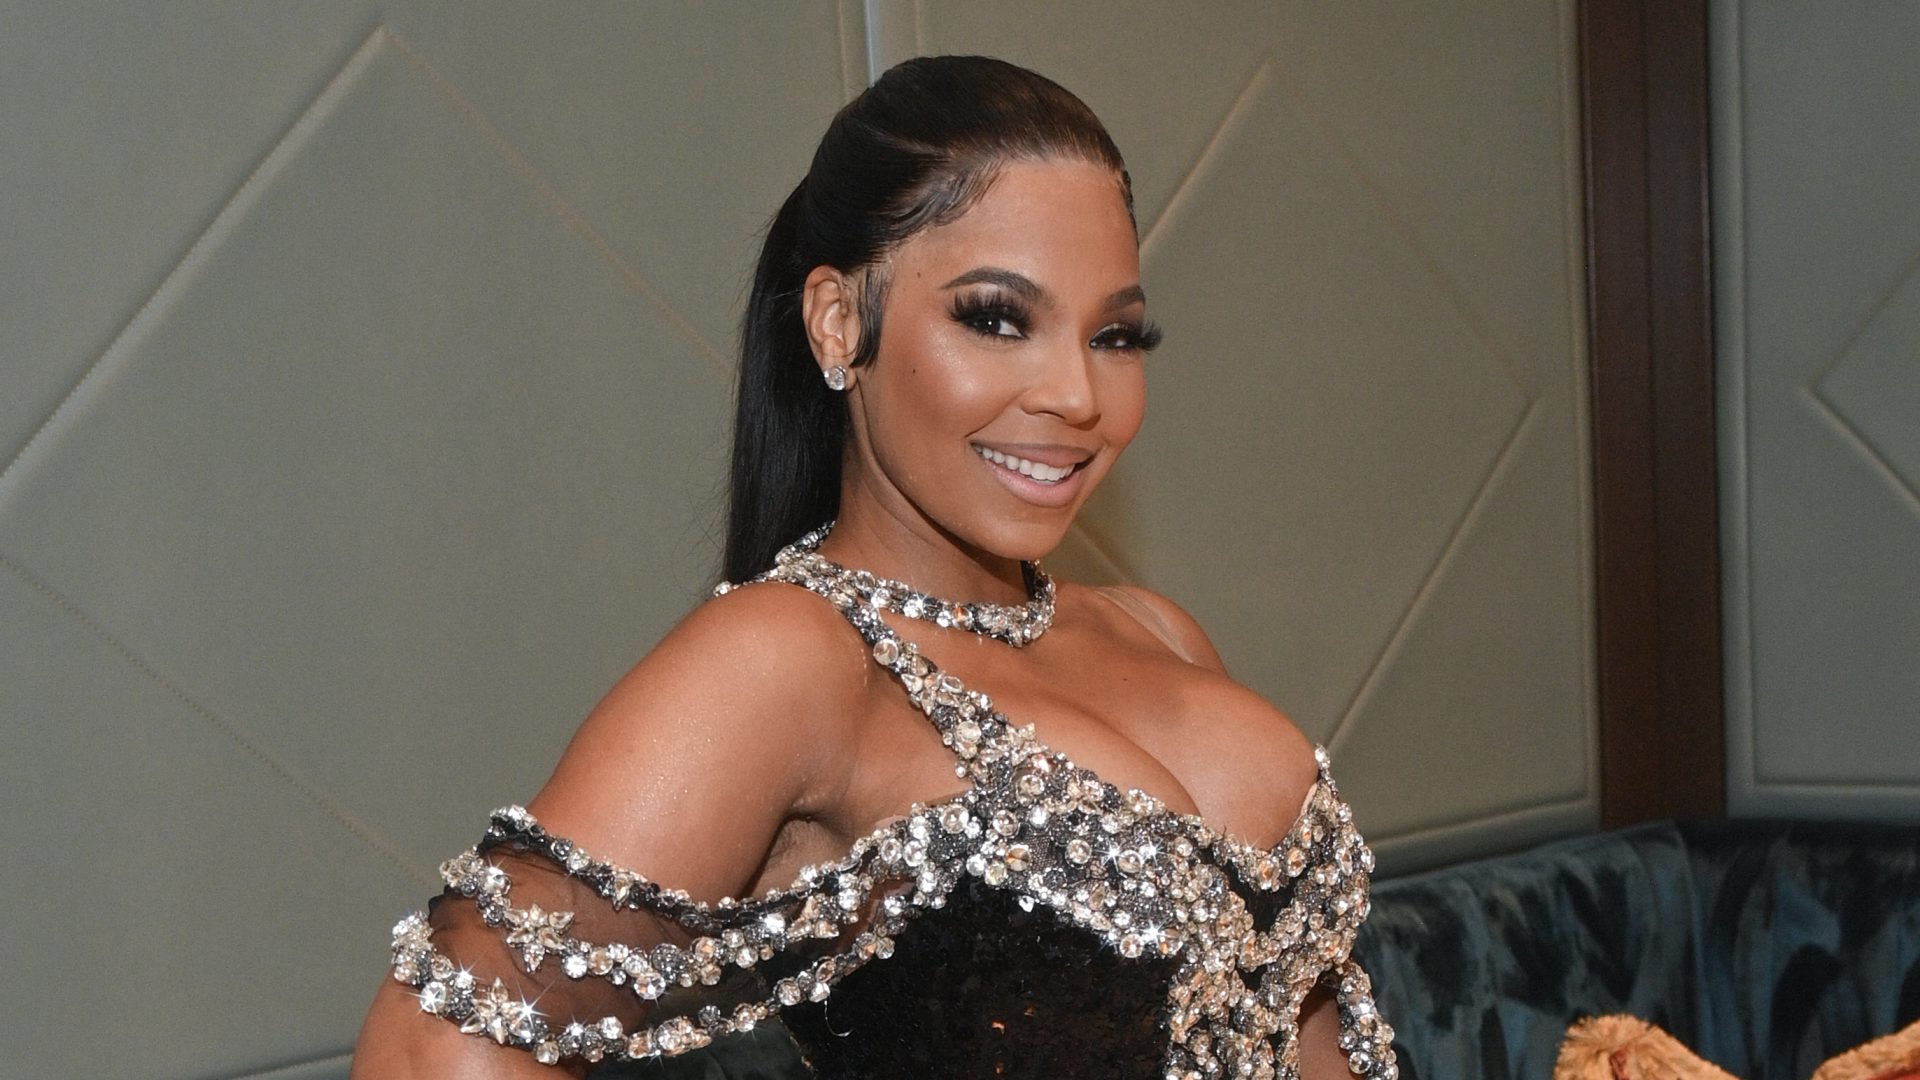 She’s A Muva! Ashanti Gives Fans A Closer Look At Her Baby Bump (VIDEOS)